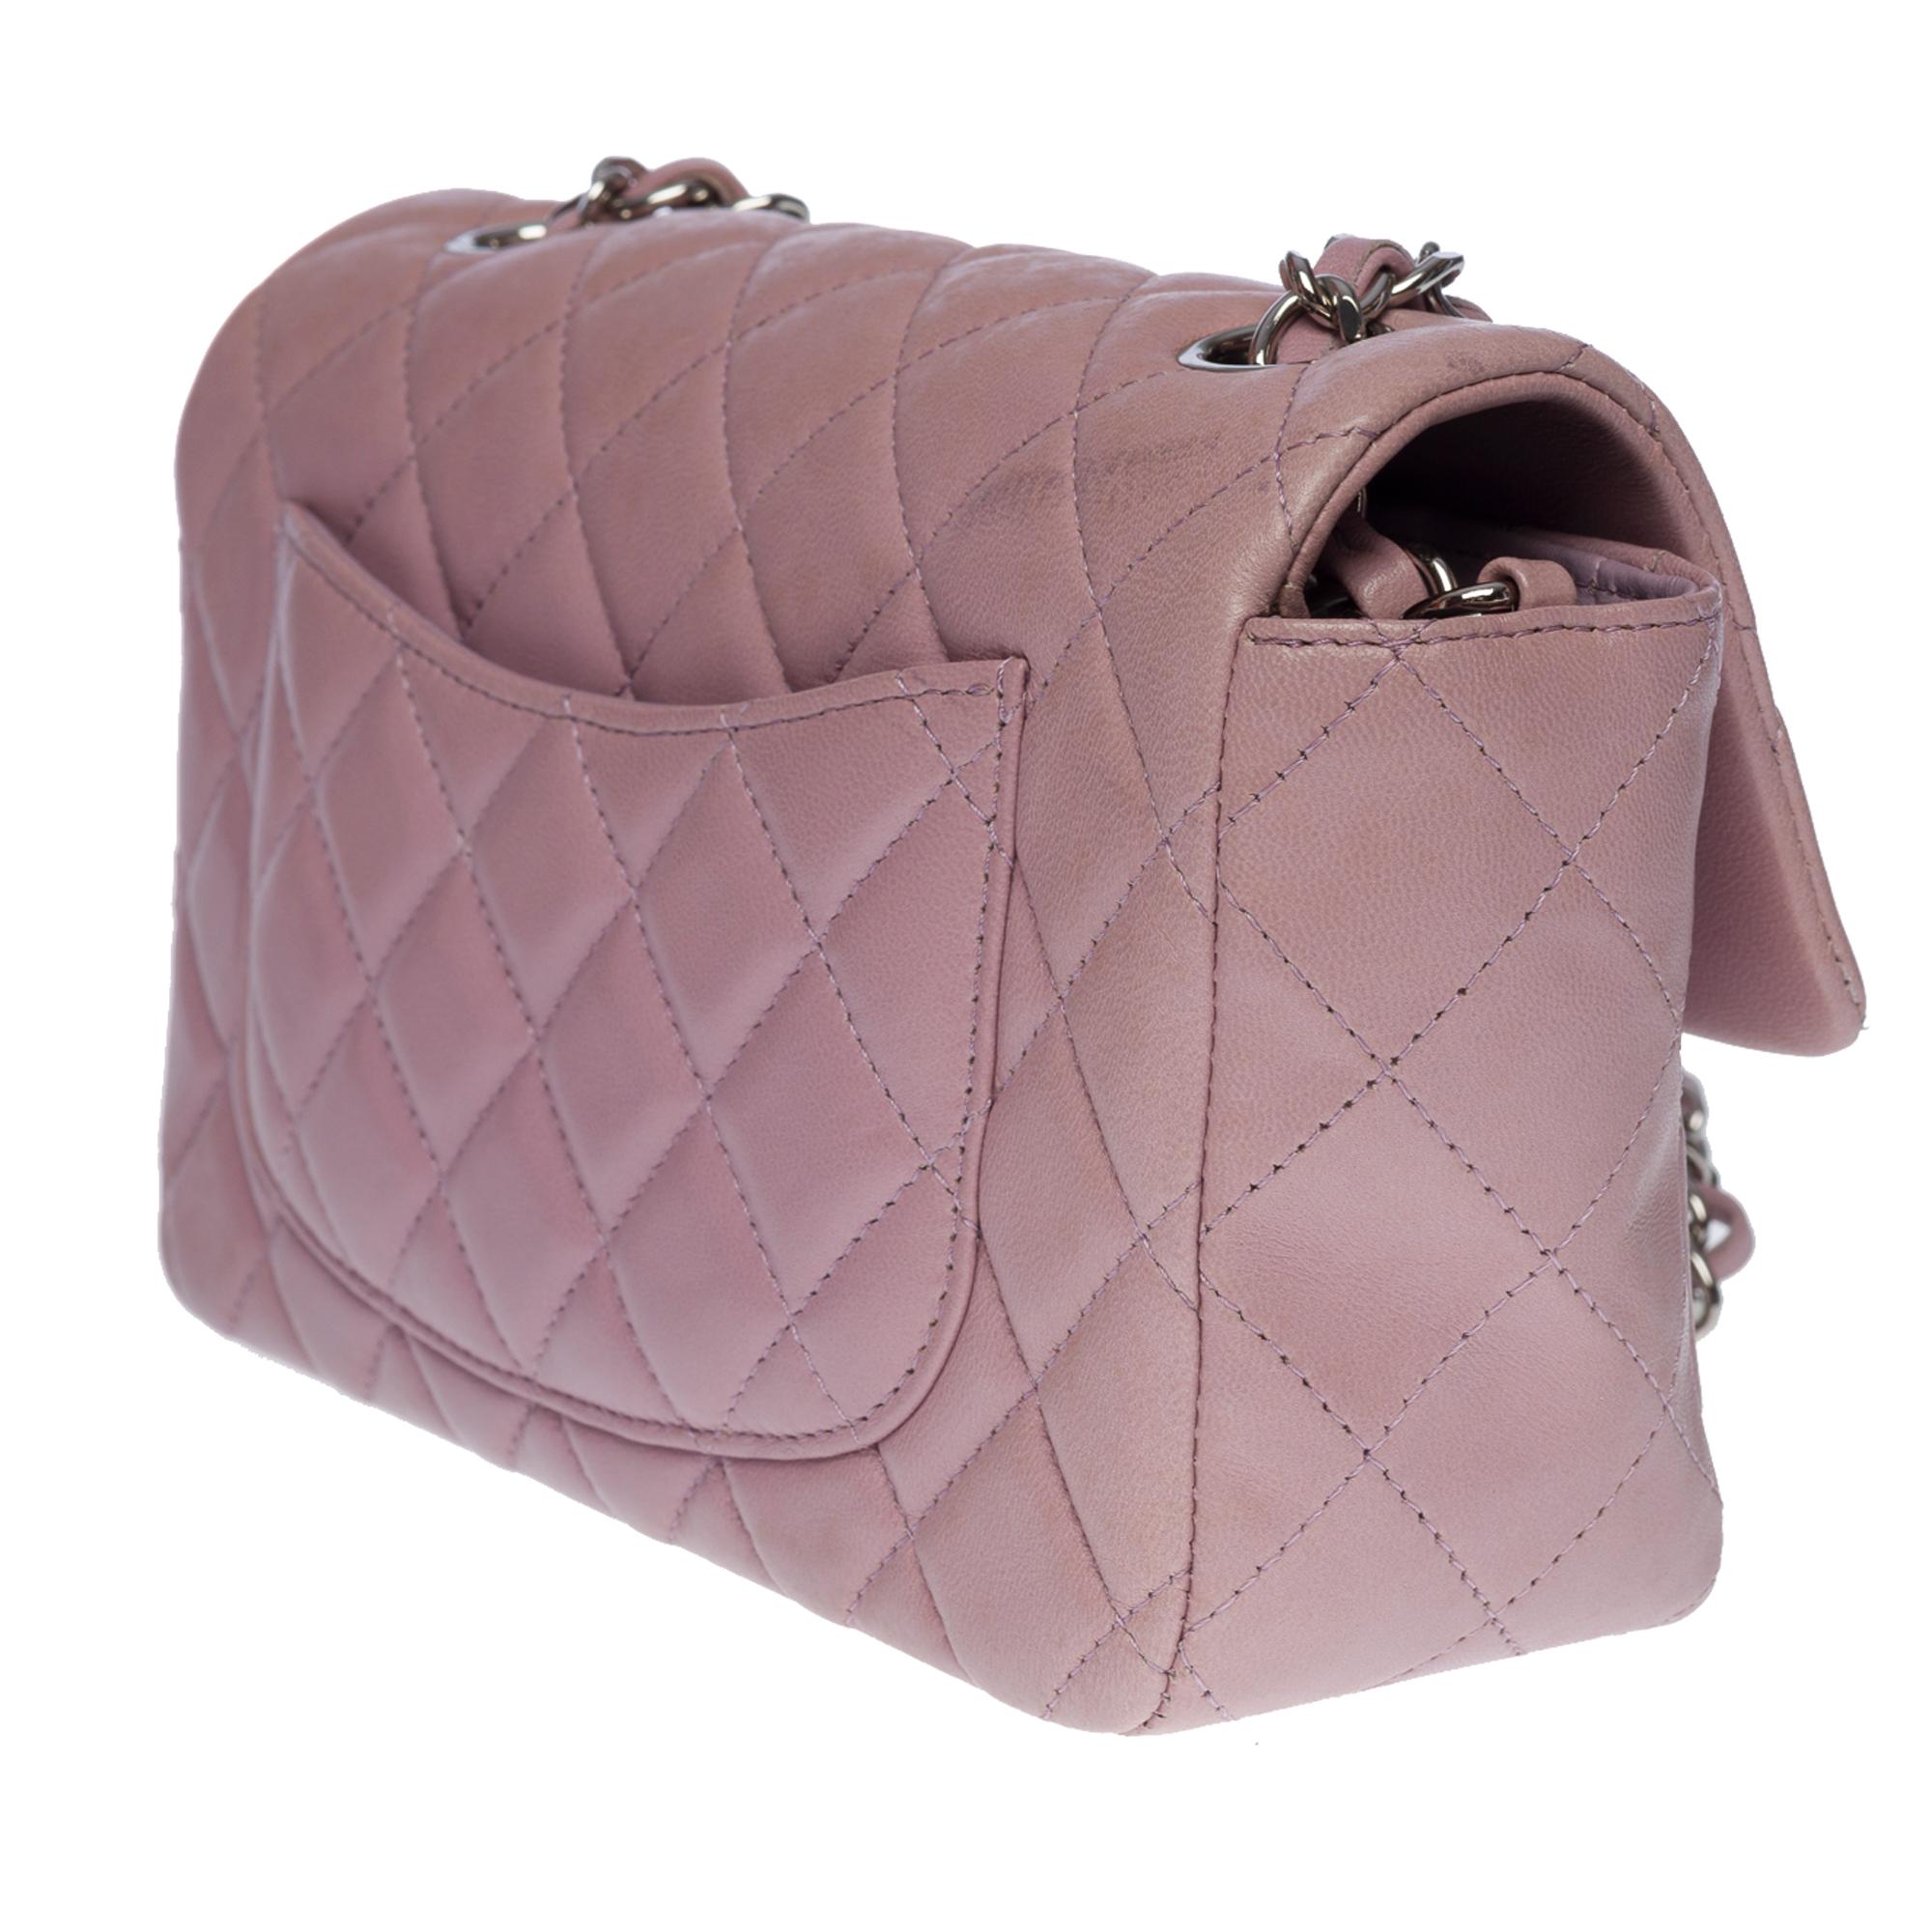 Splendid Chanel Timeless Mini Flap bag in lilac quilted lambskin leather, SHW 1